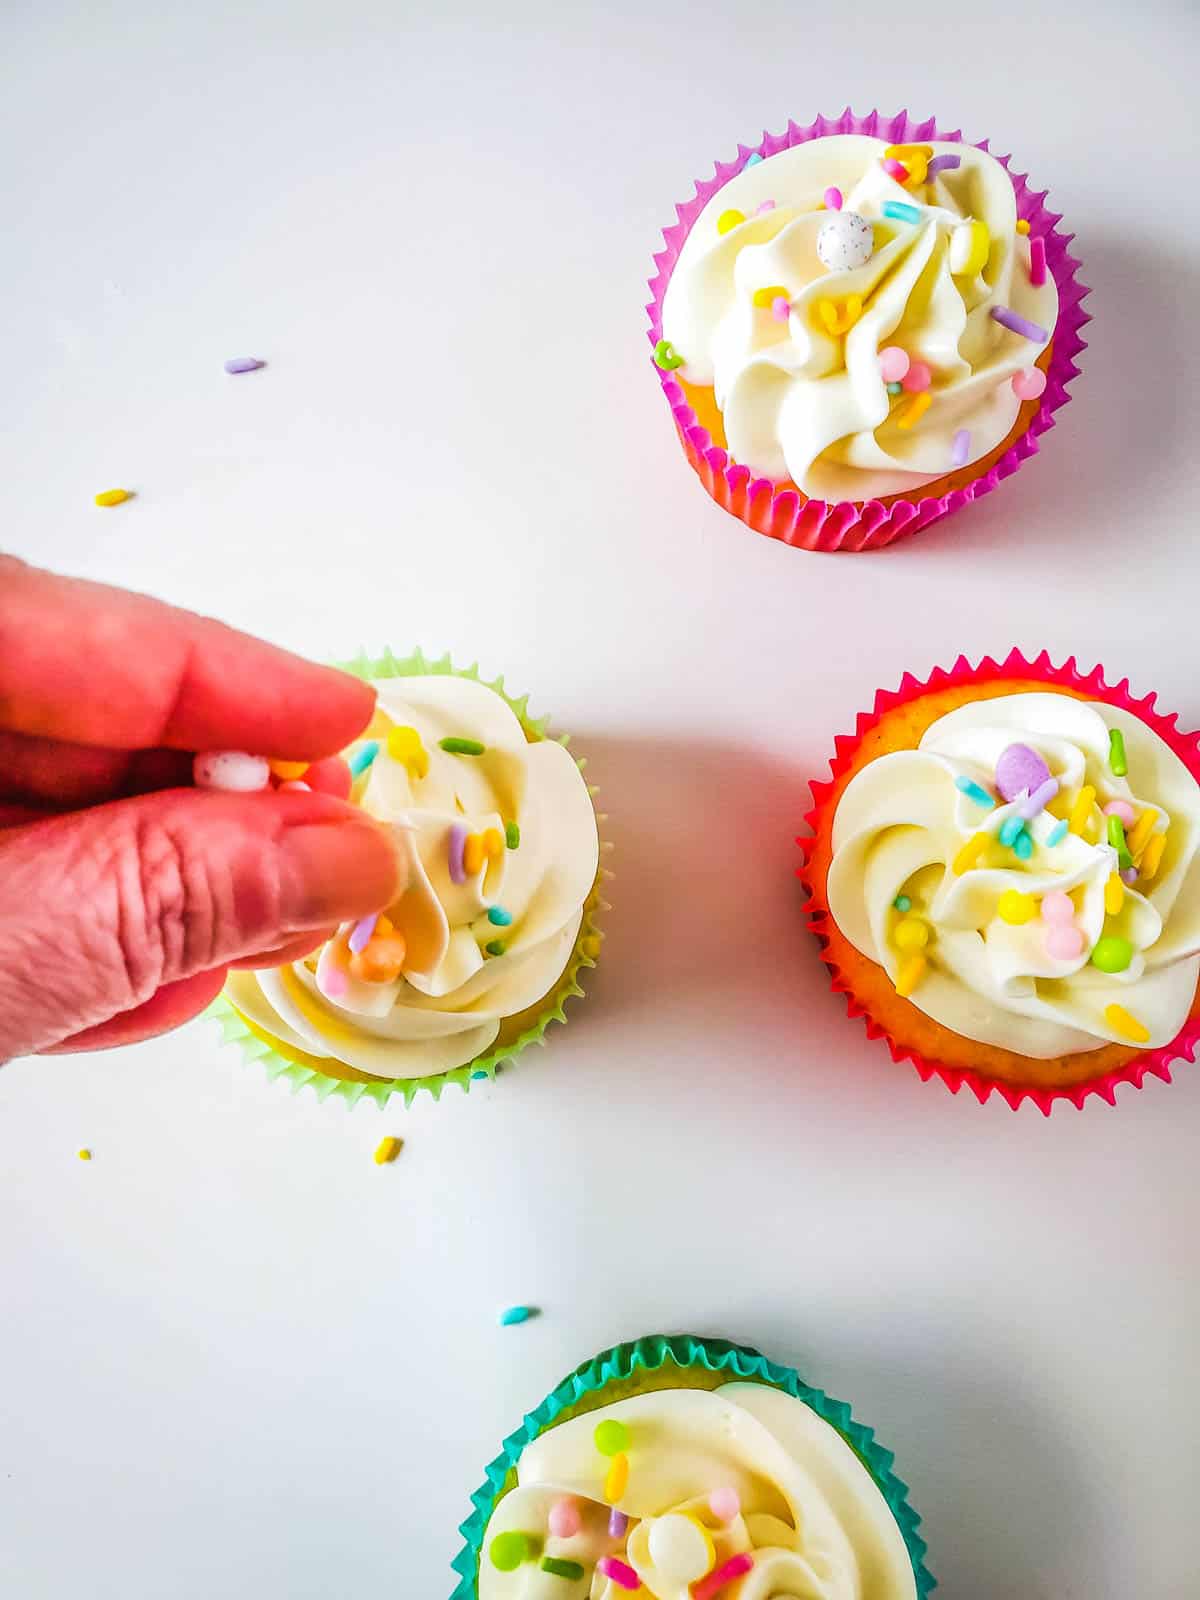 Frosted cupcakes on a table with a woman adding Easter sprinkles to decorate.